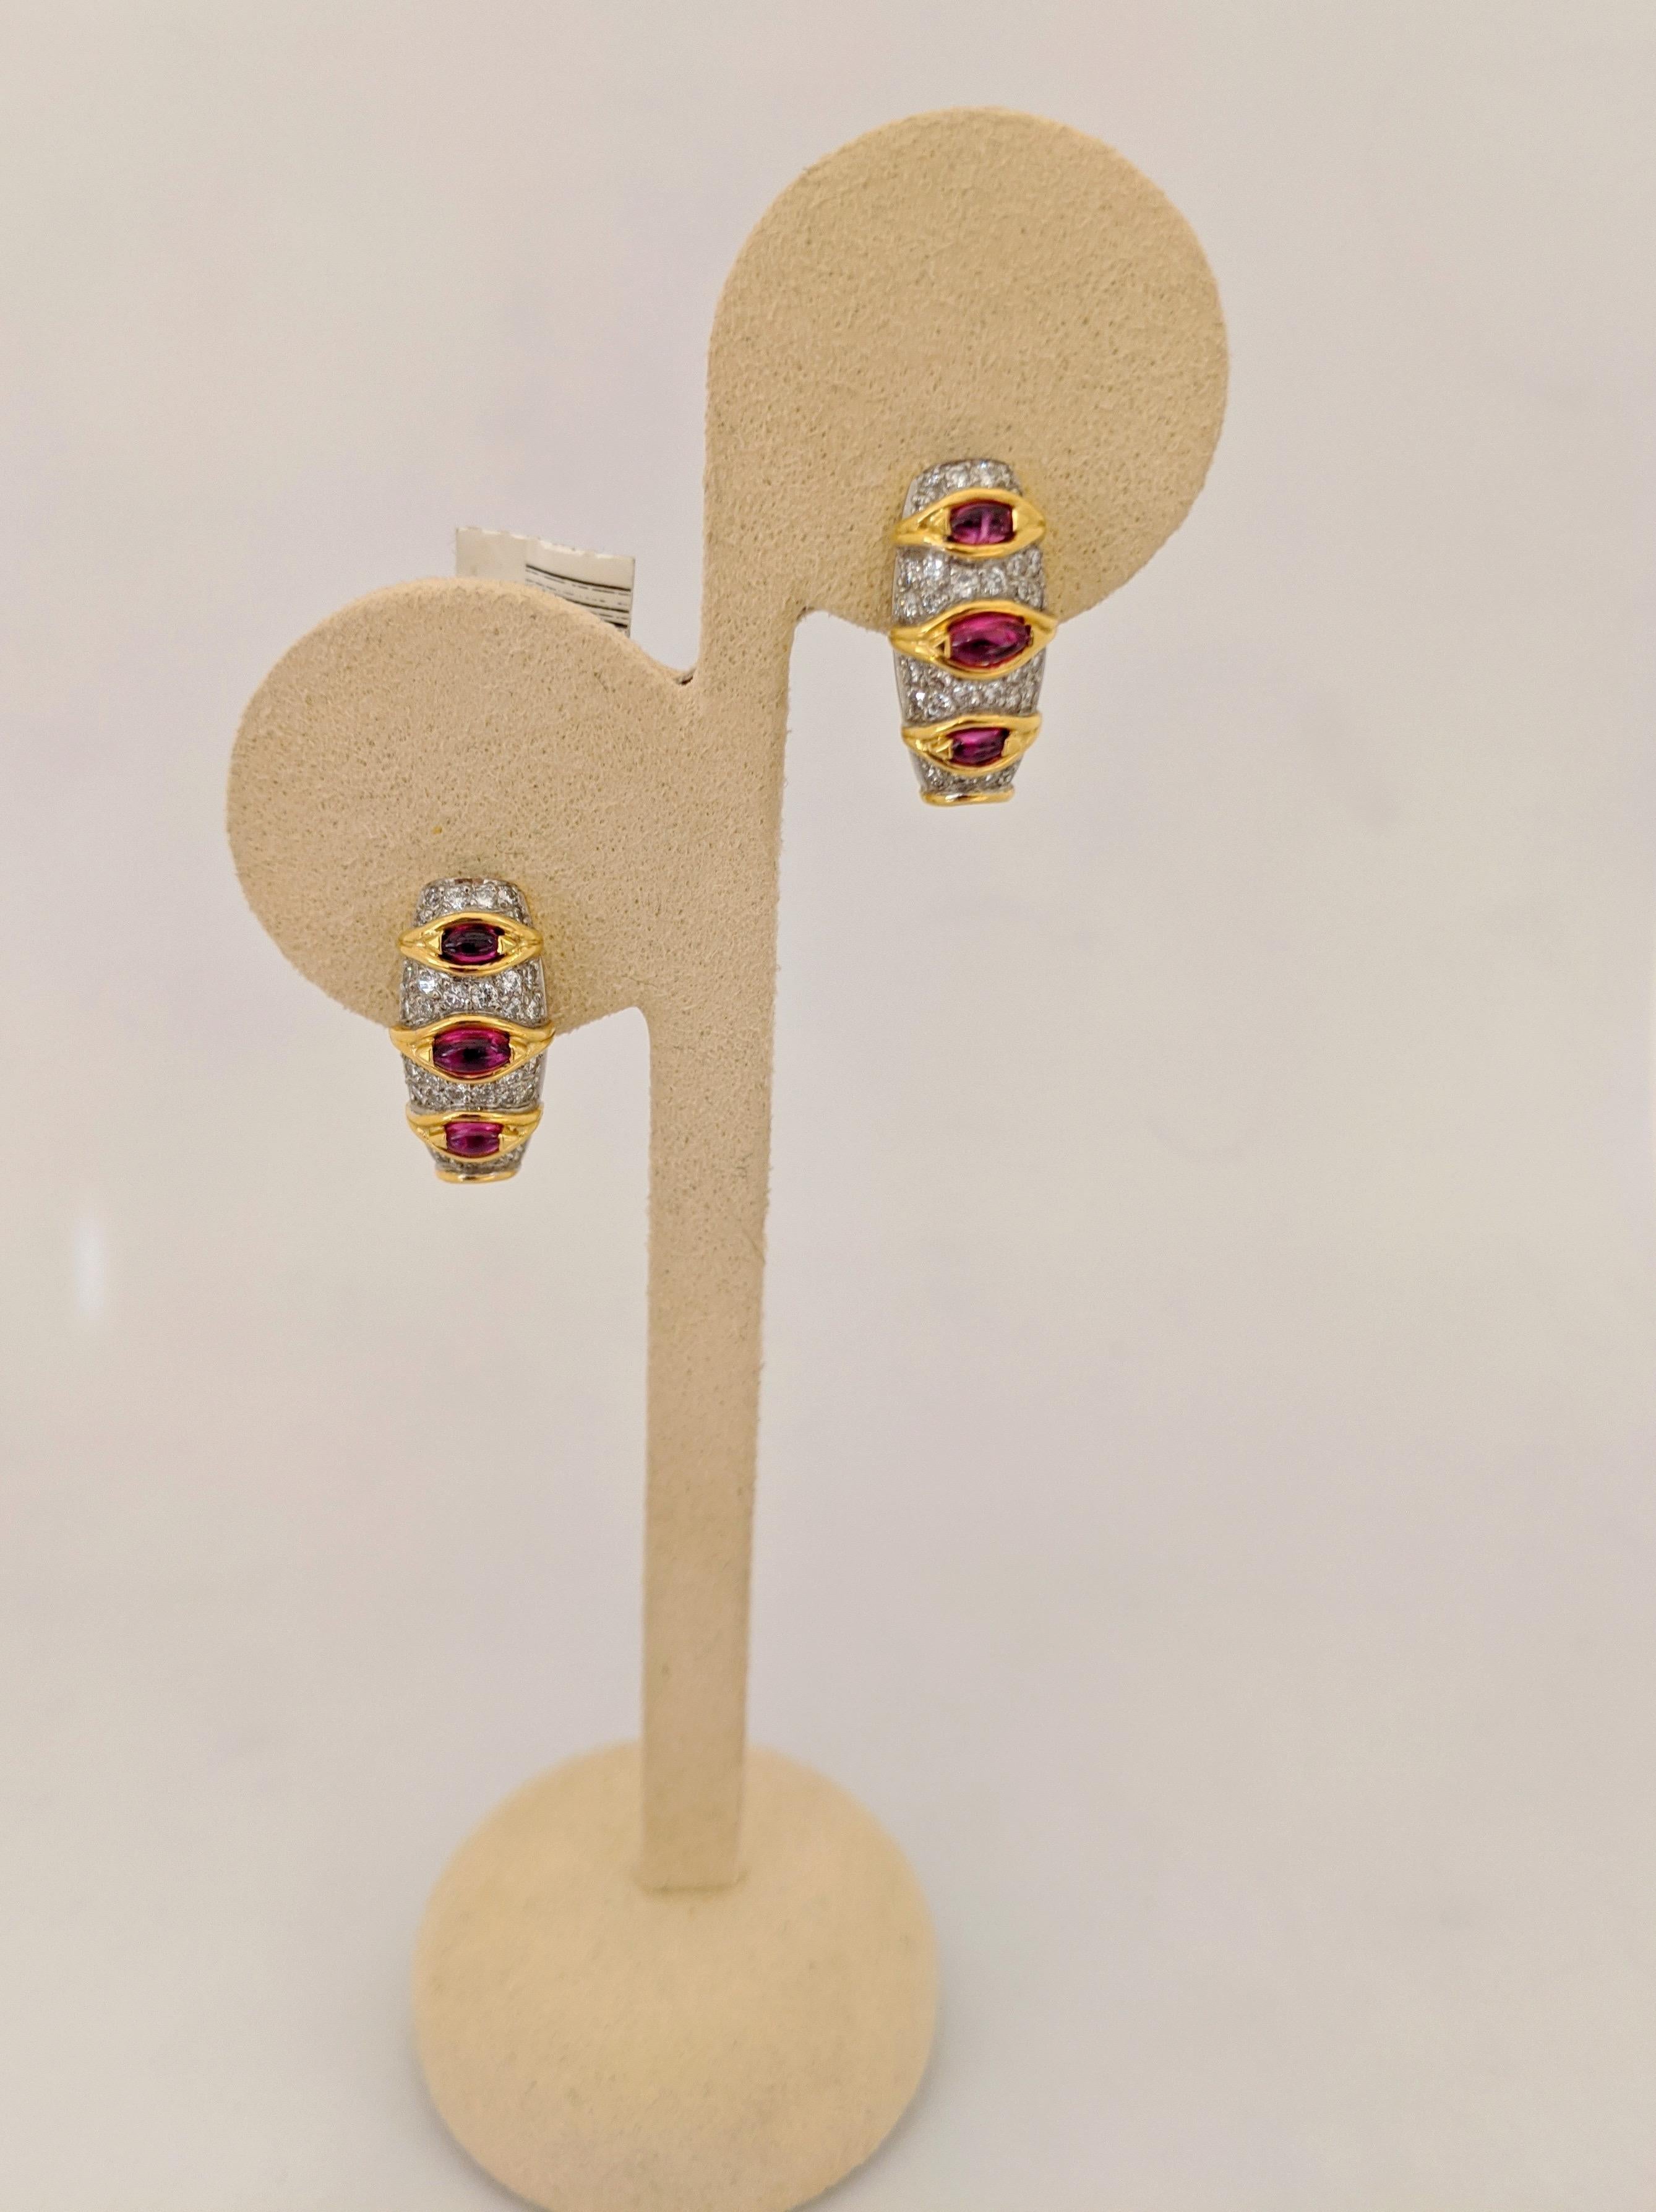 A beautiful pair of vintage 18 karat yellow gold earrings designed by Carrera Y Carrera for Cellini Jewelers NYC. These earrings features 3 marquis shaped cabachon Rubies and round brilliant pave set Diamonds. The earrings are pierced with a post